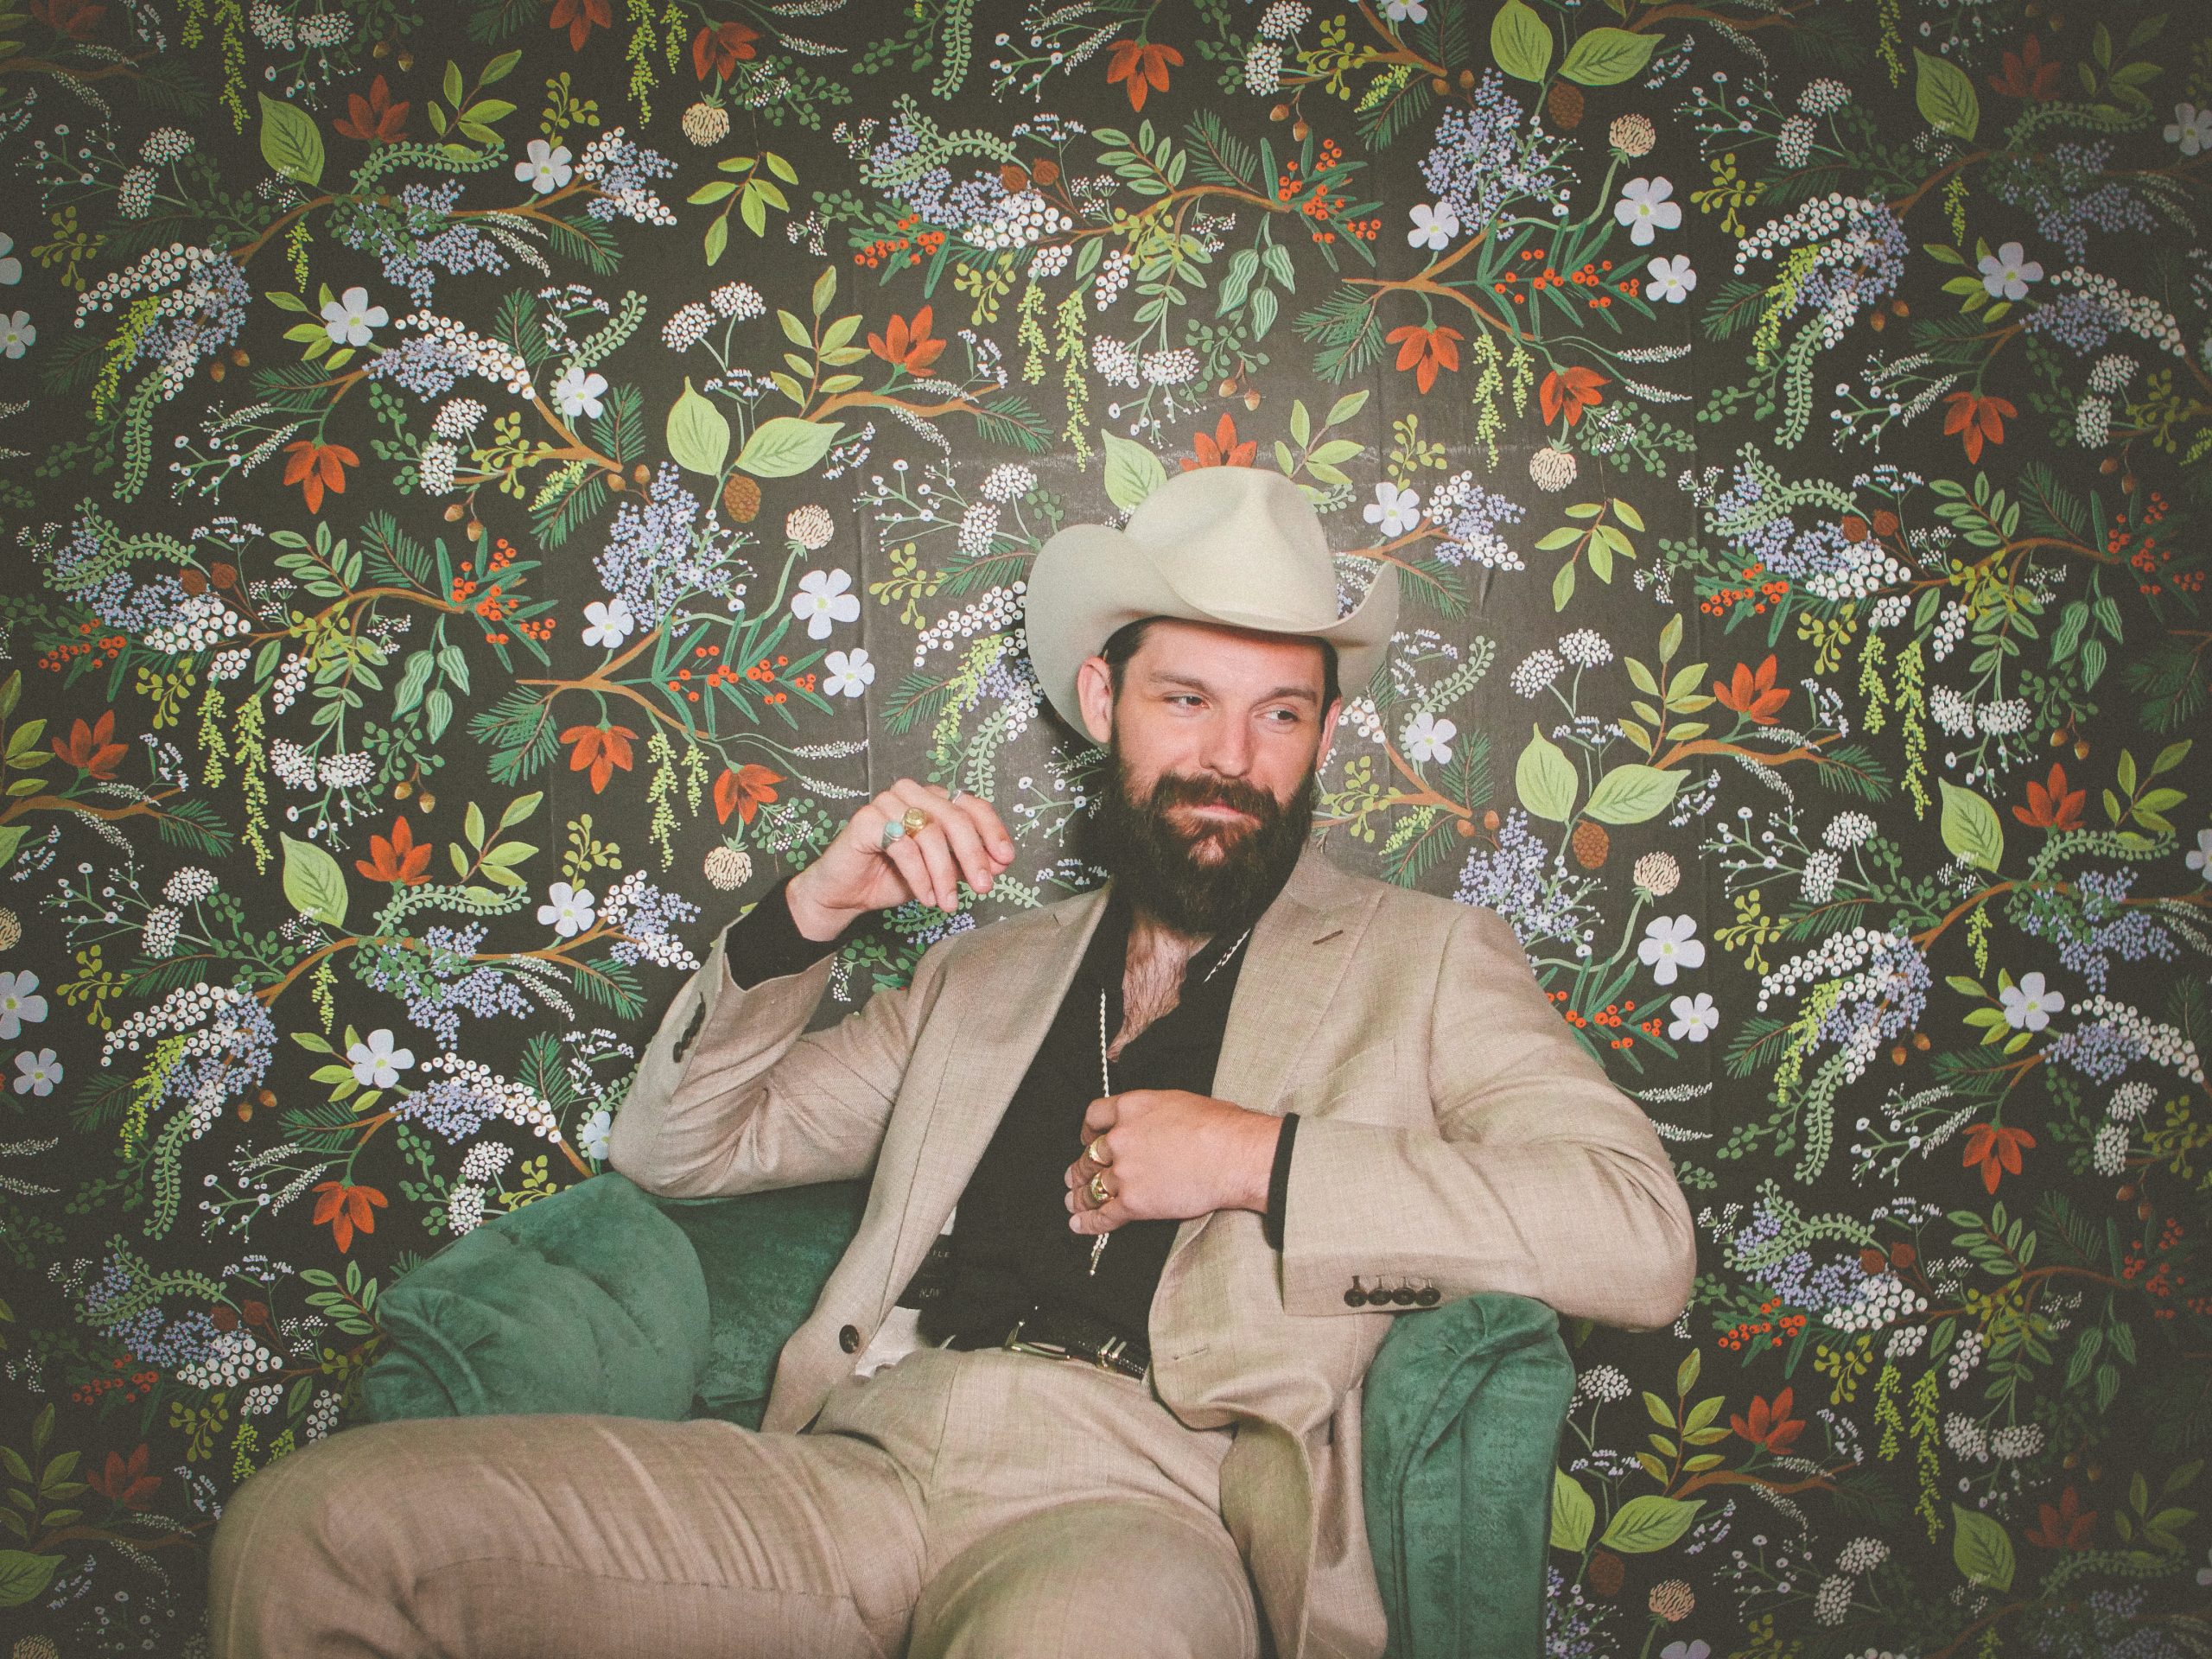 Wearing a tan suit, Nathan Mongol Wells sits in front of tropical wallpaper